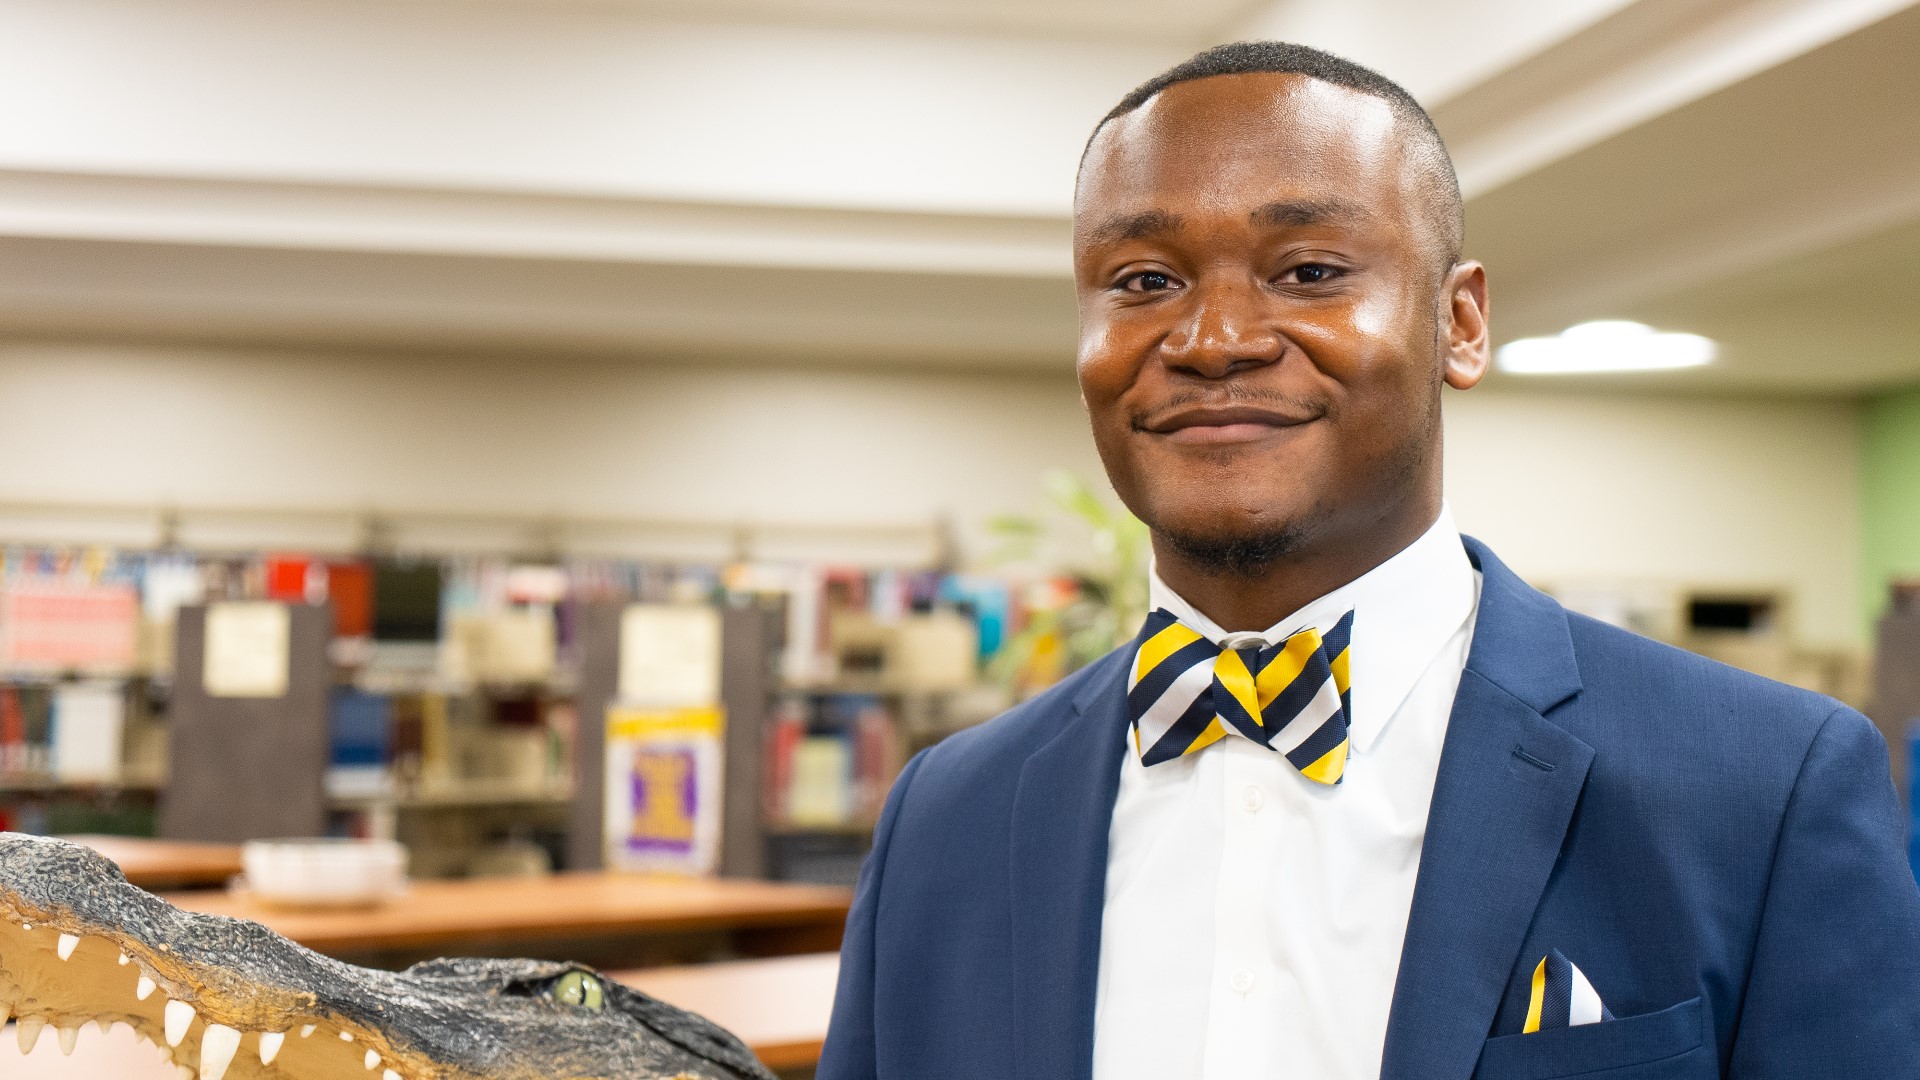 Deion Jamison received the honor of being recognized as South Carolina's 2023 Teacher of the Year, making him the first Black man to earn the title.